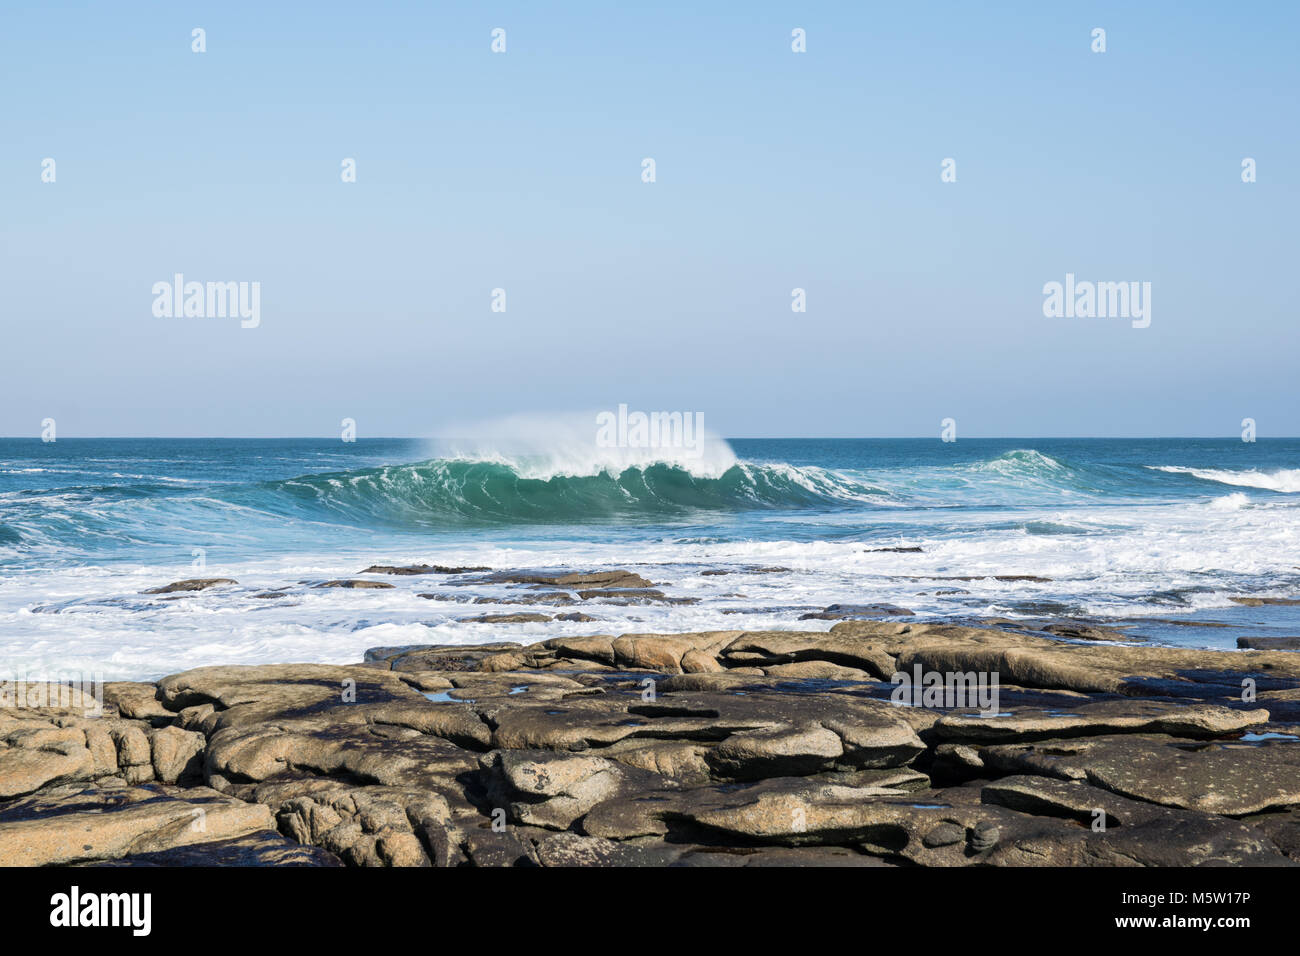 Waves crashing on to a rocky beach on a clear sunny day Stock Photo